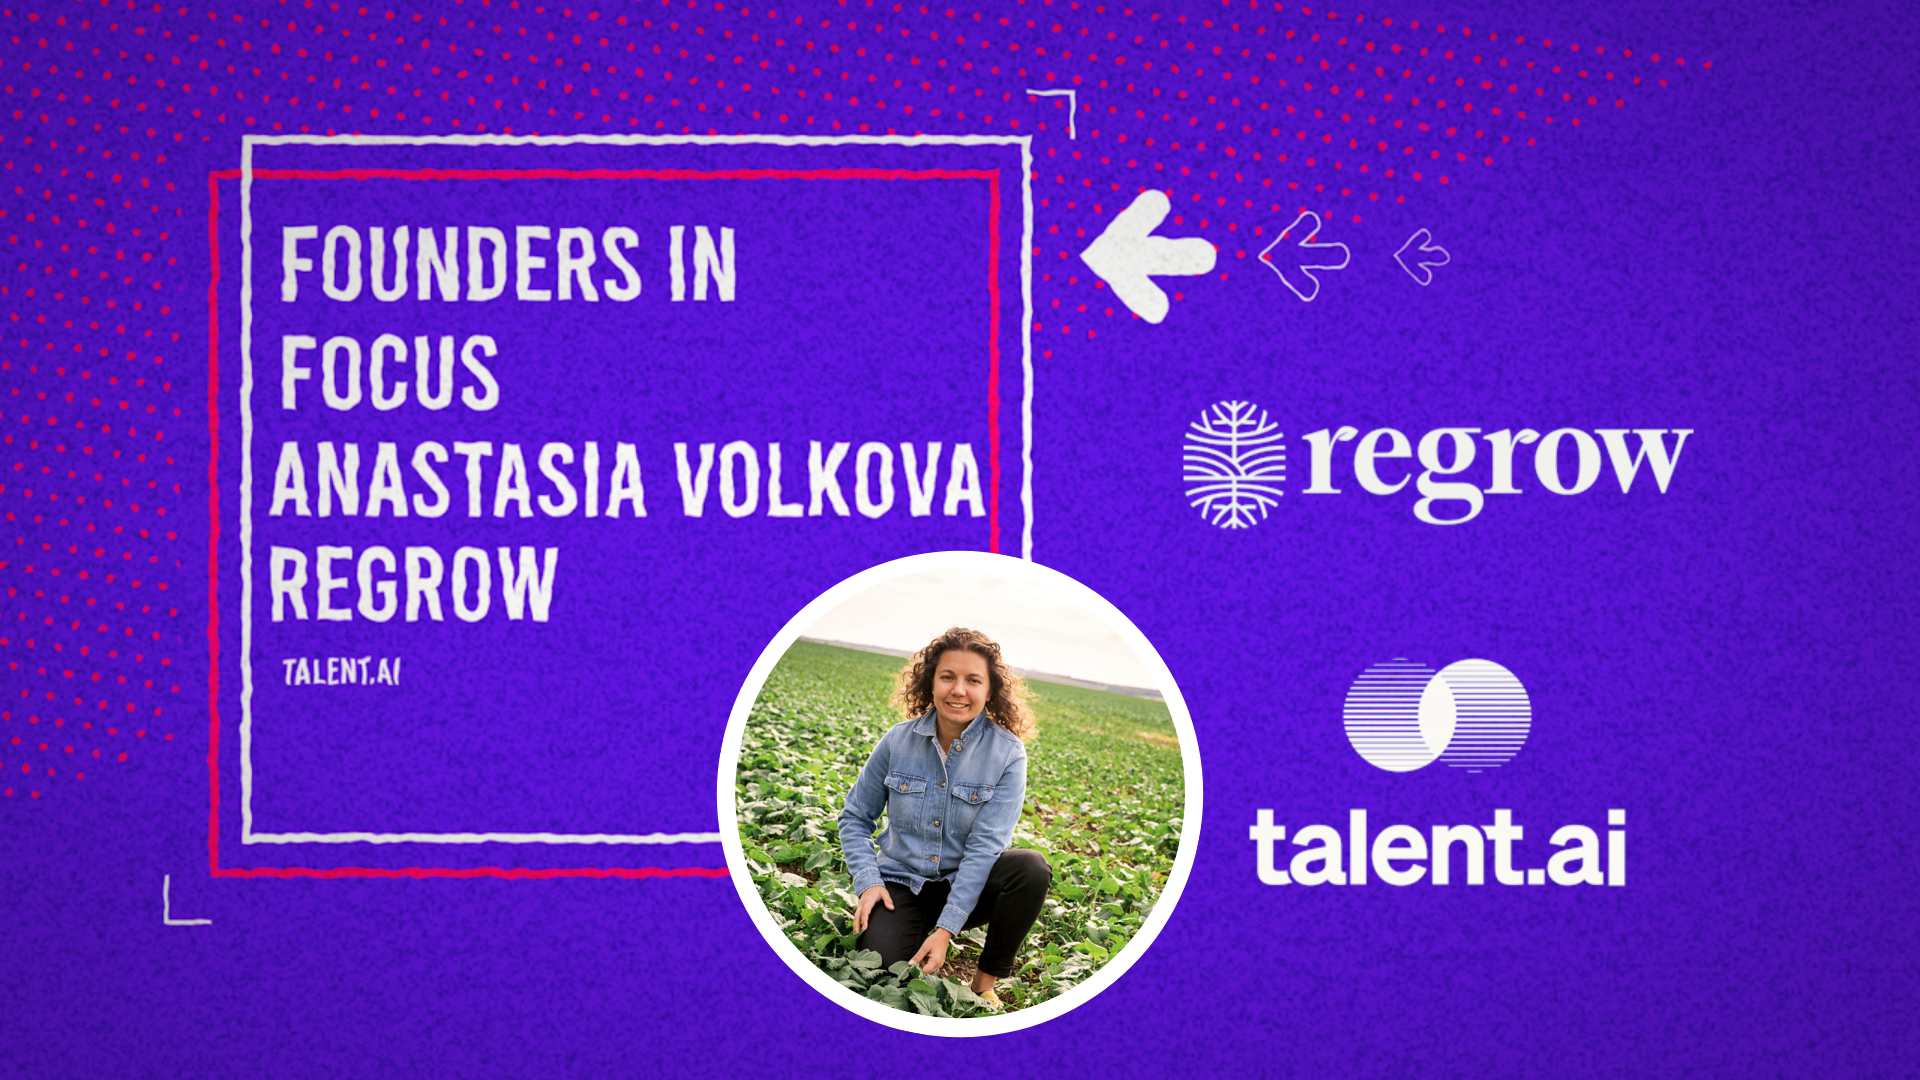 We spoke Regrow CEO Anastasia Volkova, PhD about the road from having “no green thumbs” to using her engineering knowledge to make impactful change happen. 